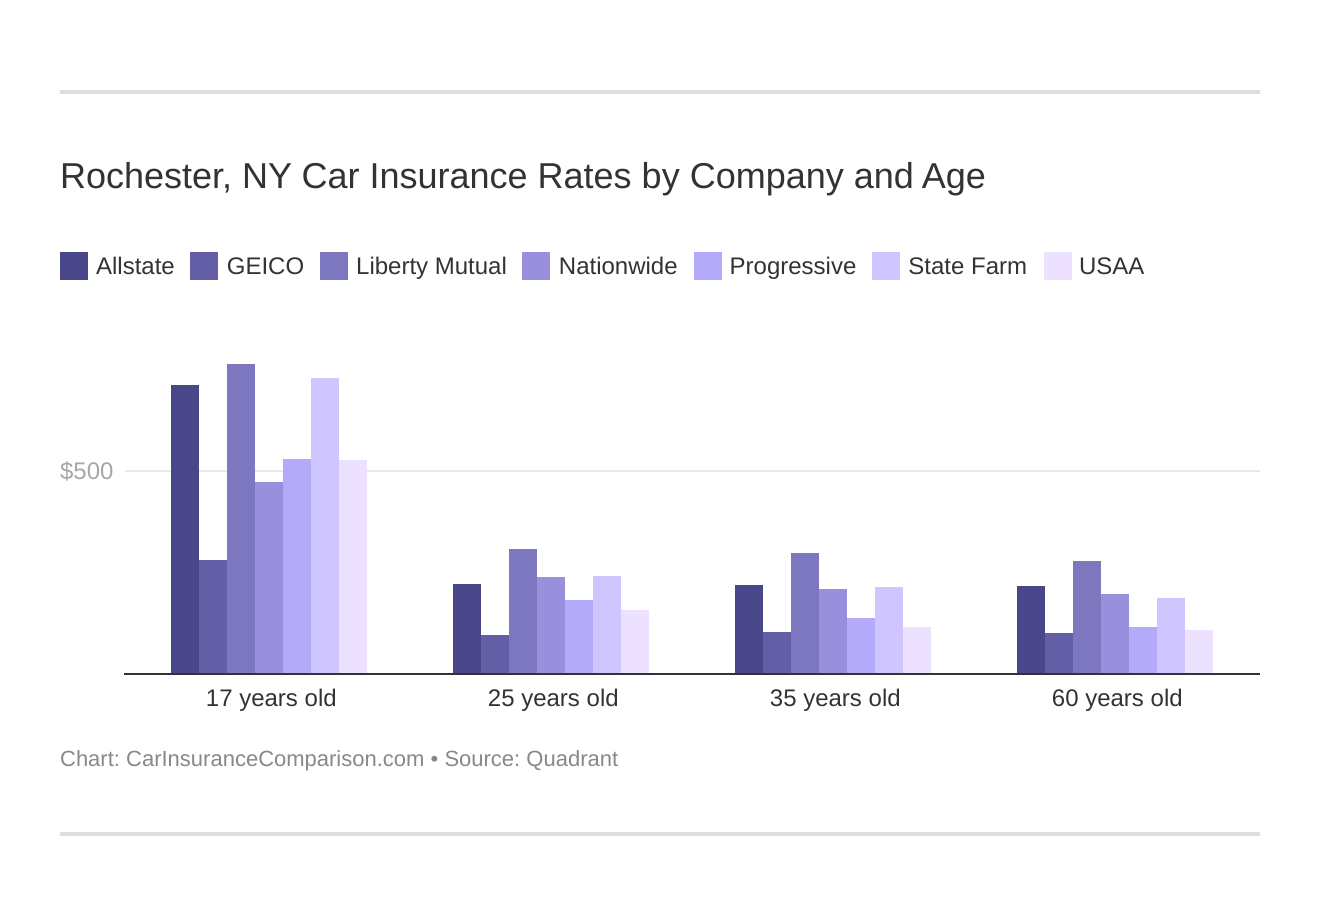 Rochester, NY Car Insurance Rates by Company and Age